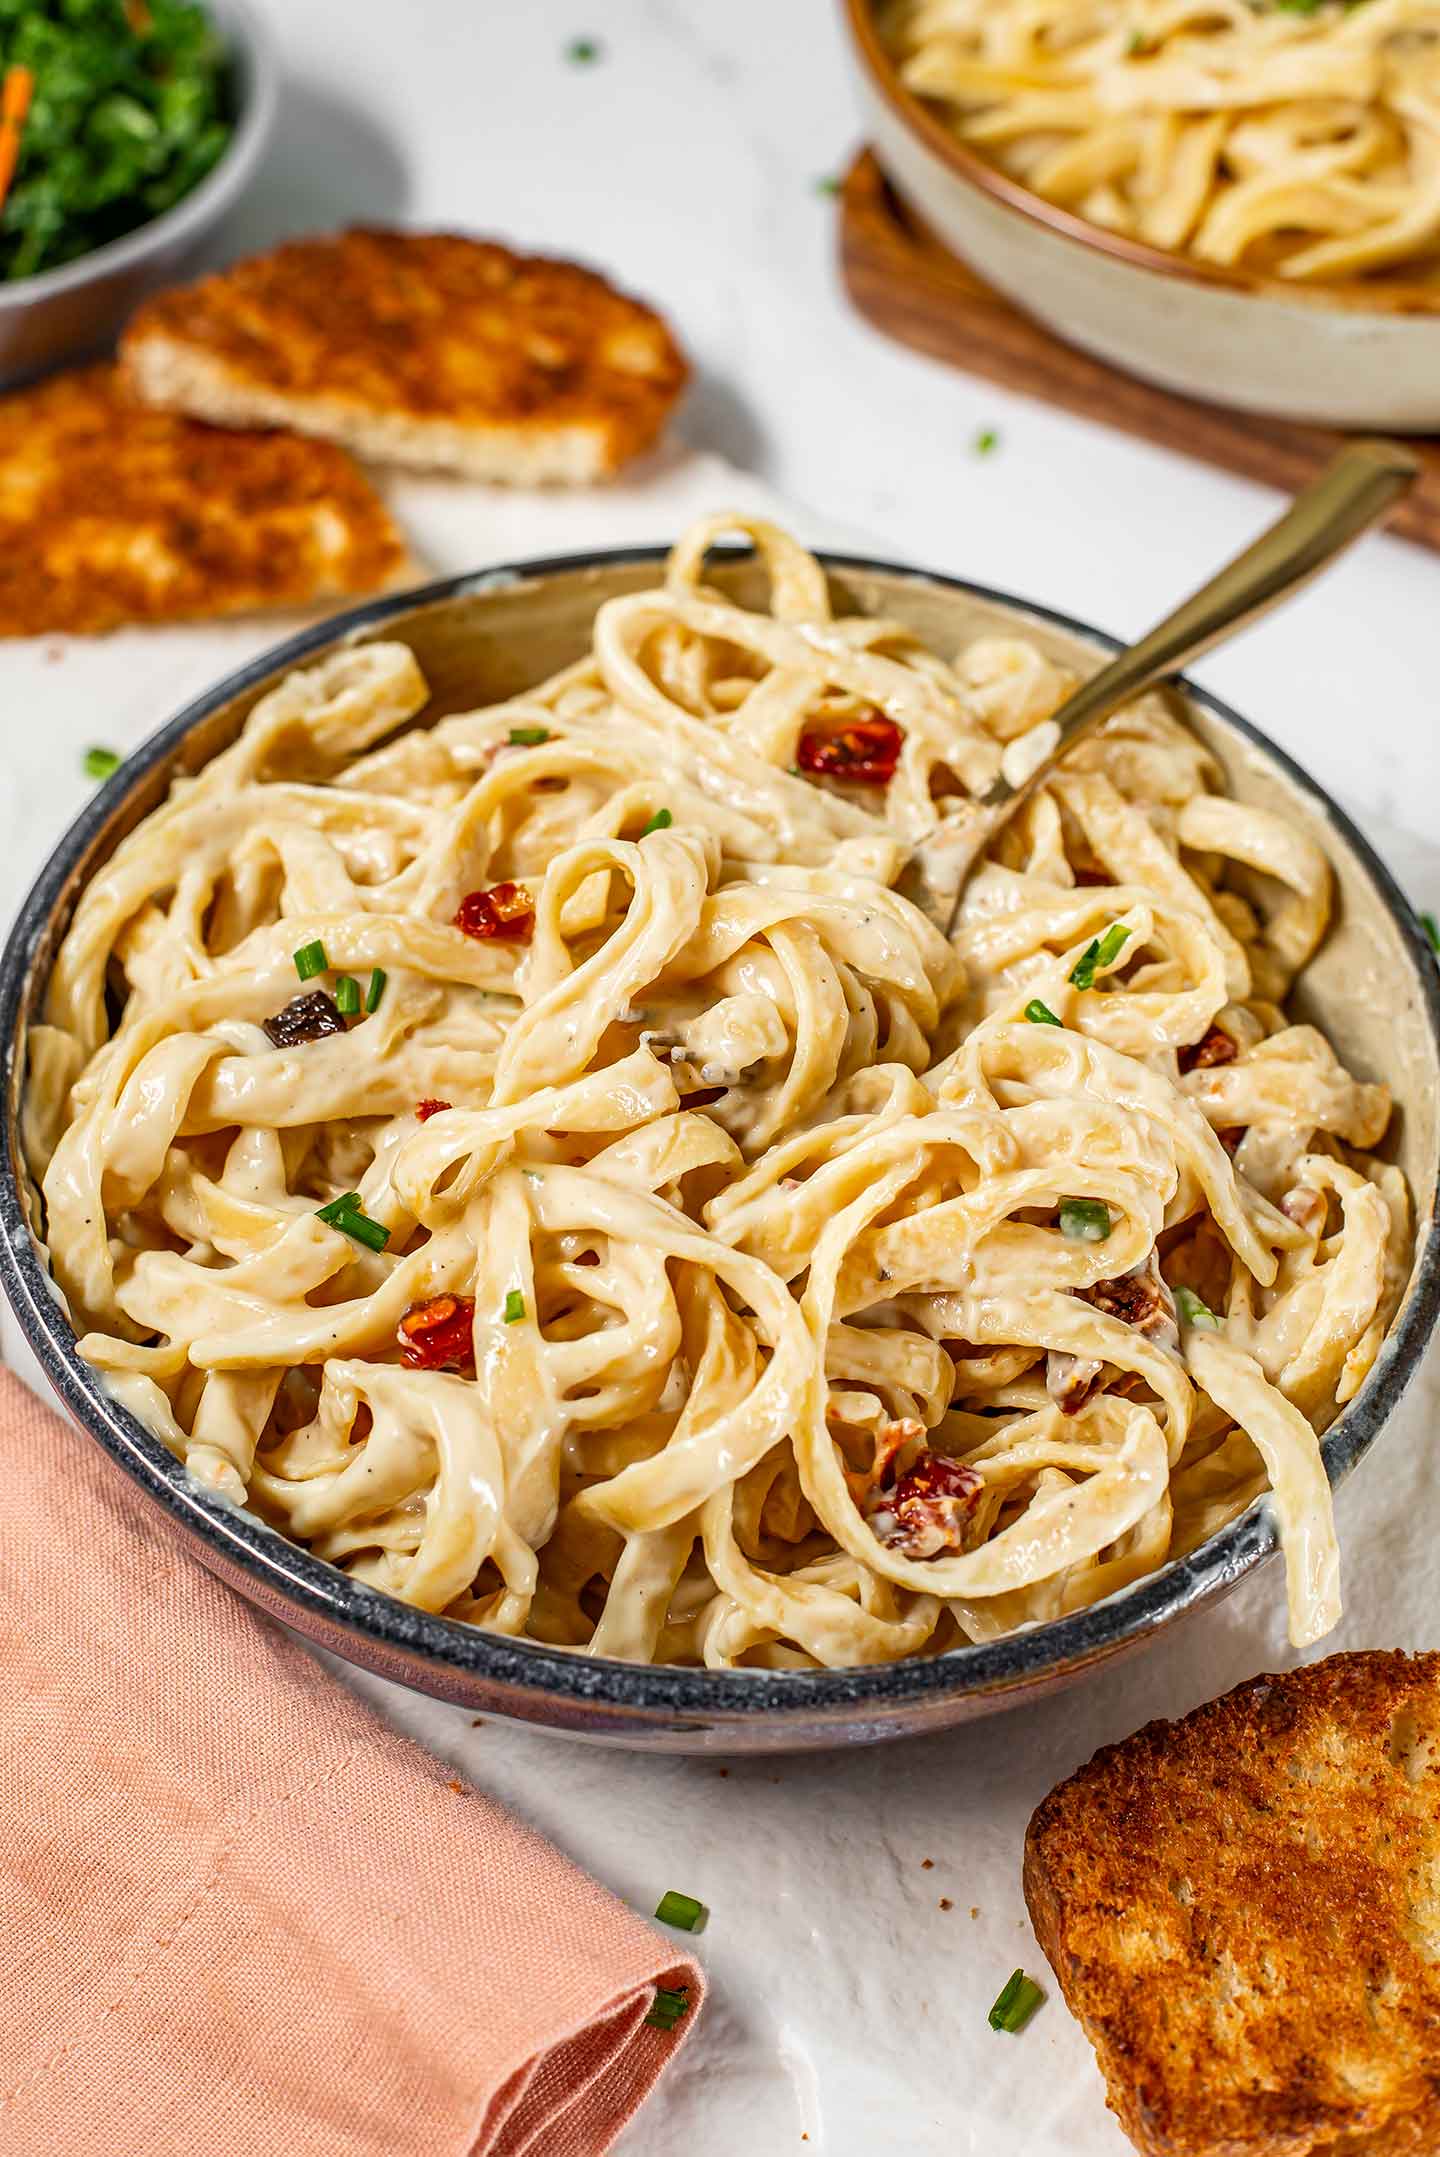 A fork rests in a bowl of dairy-free fettuccine alfredo. The creamy noodles spill over the sides of the pasta bowl.